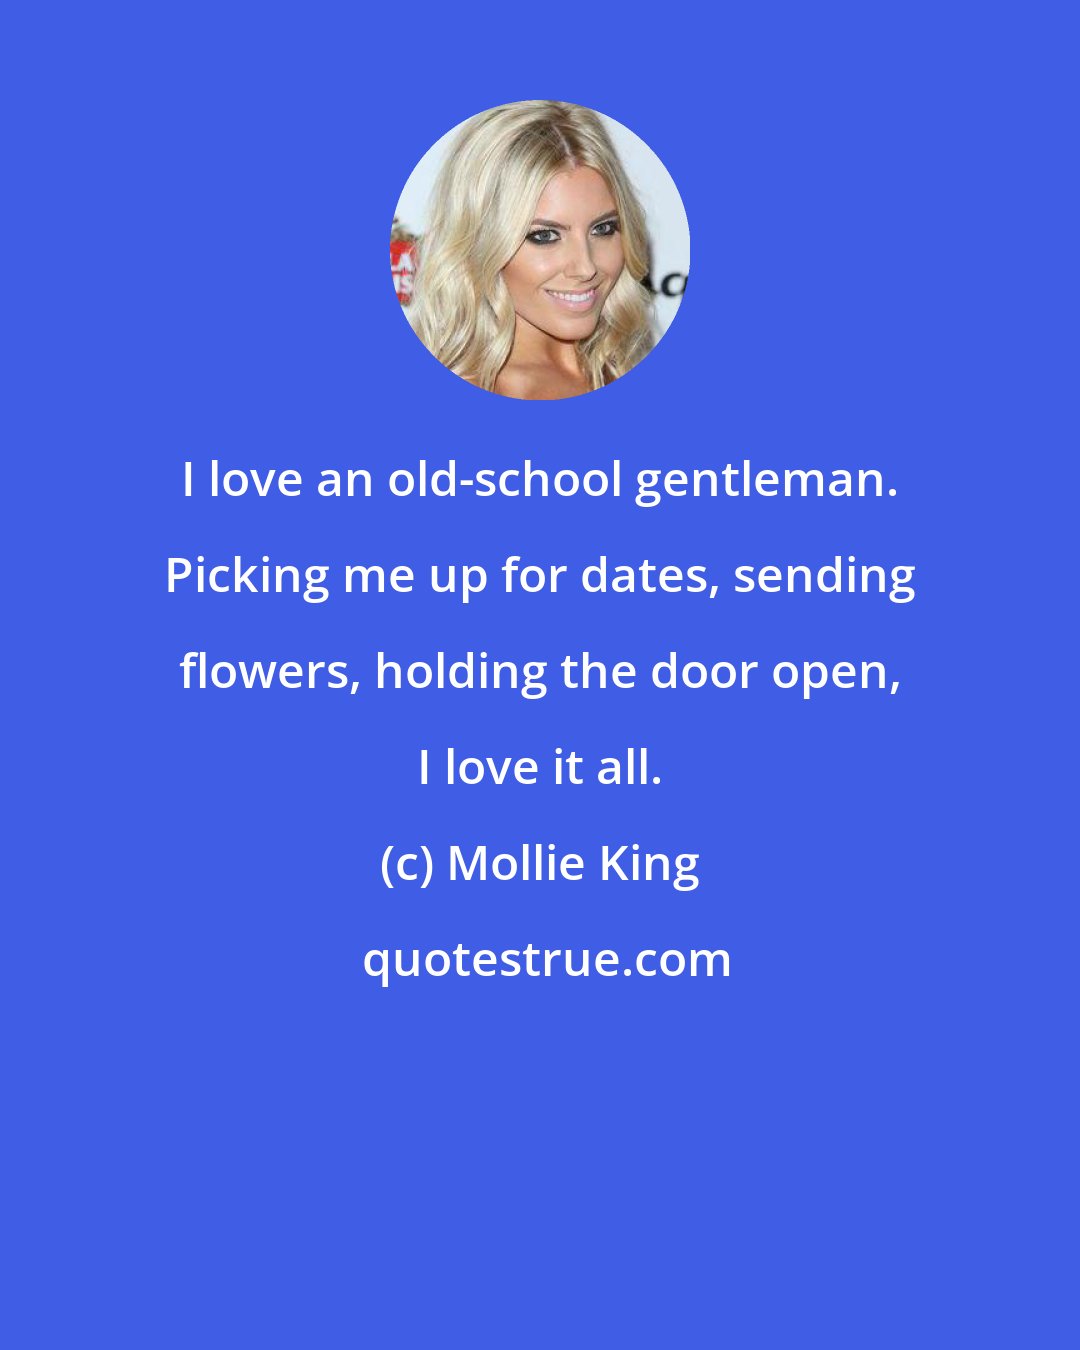 Mollie King: I love an old-school gentleman. Picking me up for dates, sending flowers, holding the door open, I love it all.